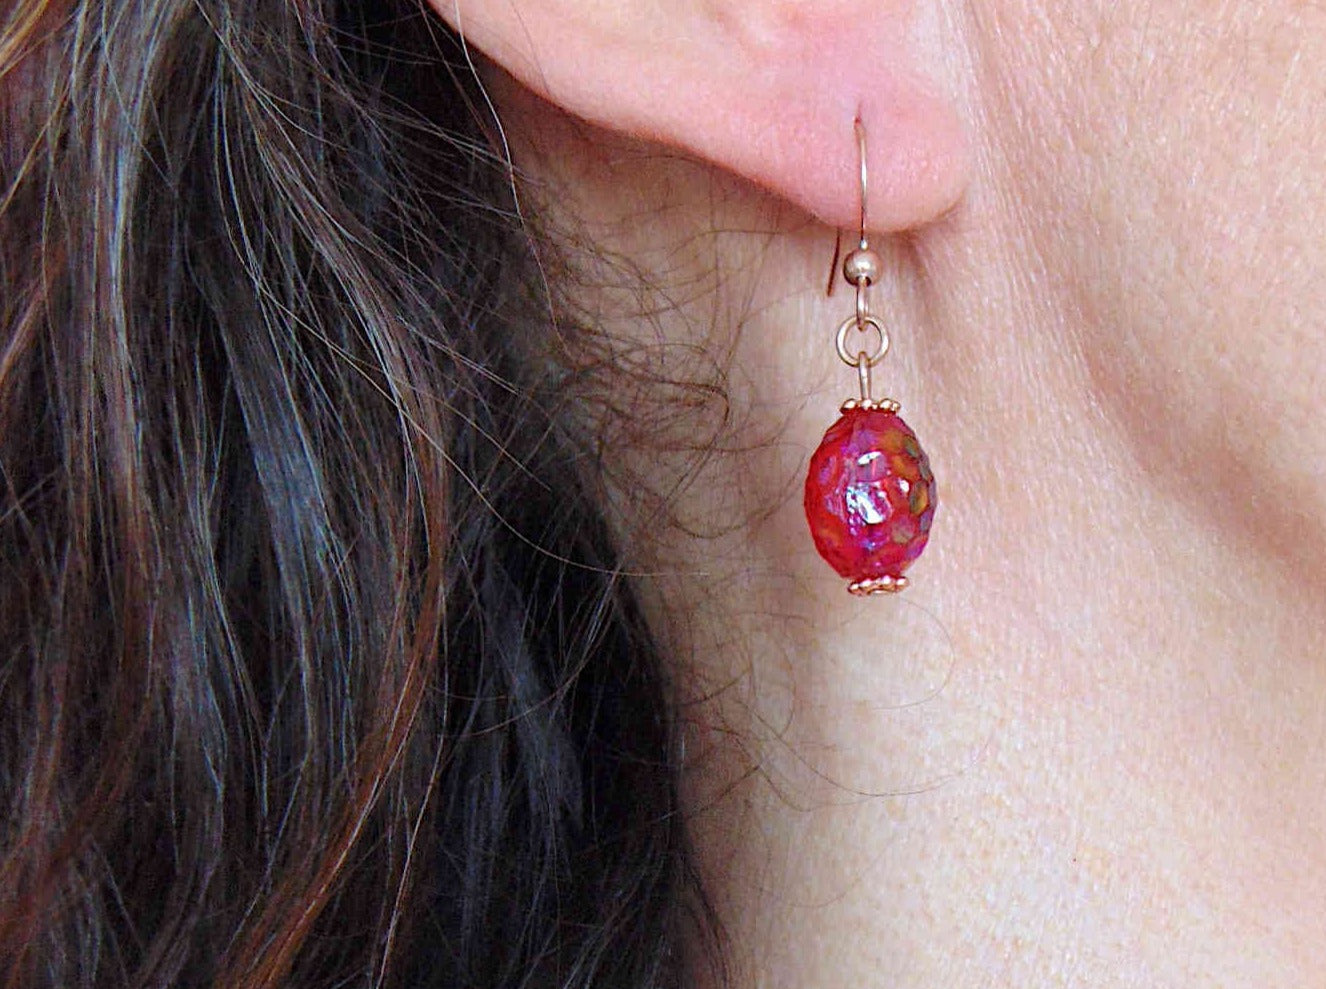 Short earrings with iridescent deep burgundy red vintage glass raspberry beads, rose gold-toned stainless steel hooks